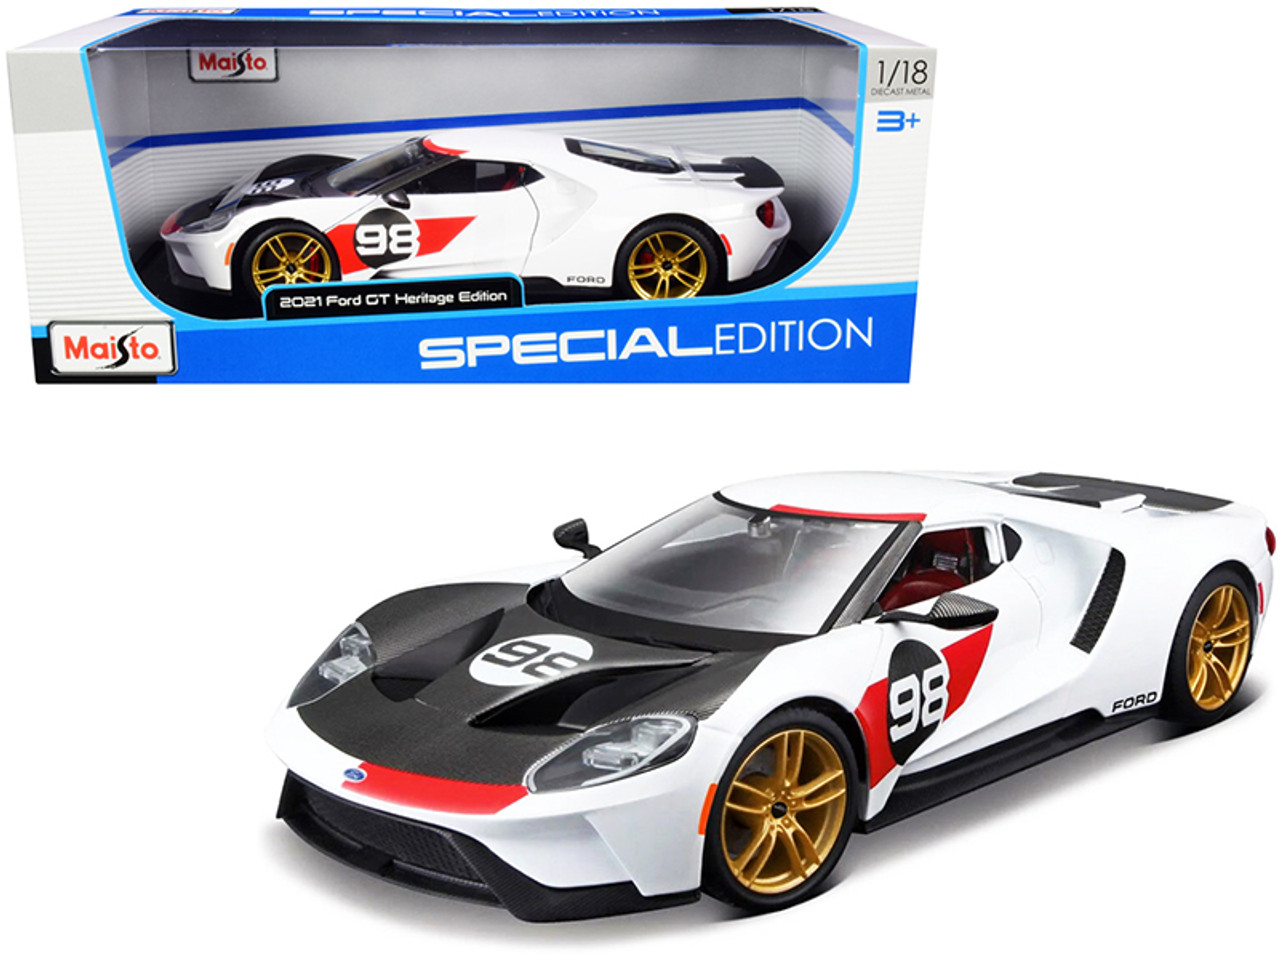 1/18 Maisto 2021 Ford GT #98 White "Heritage Edition" Diecast Model Car